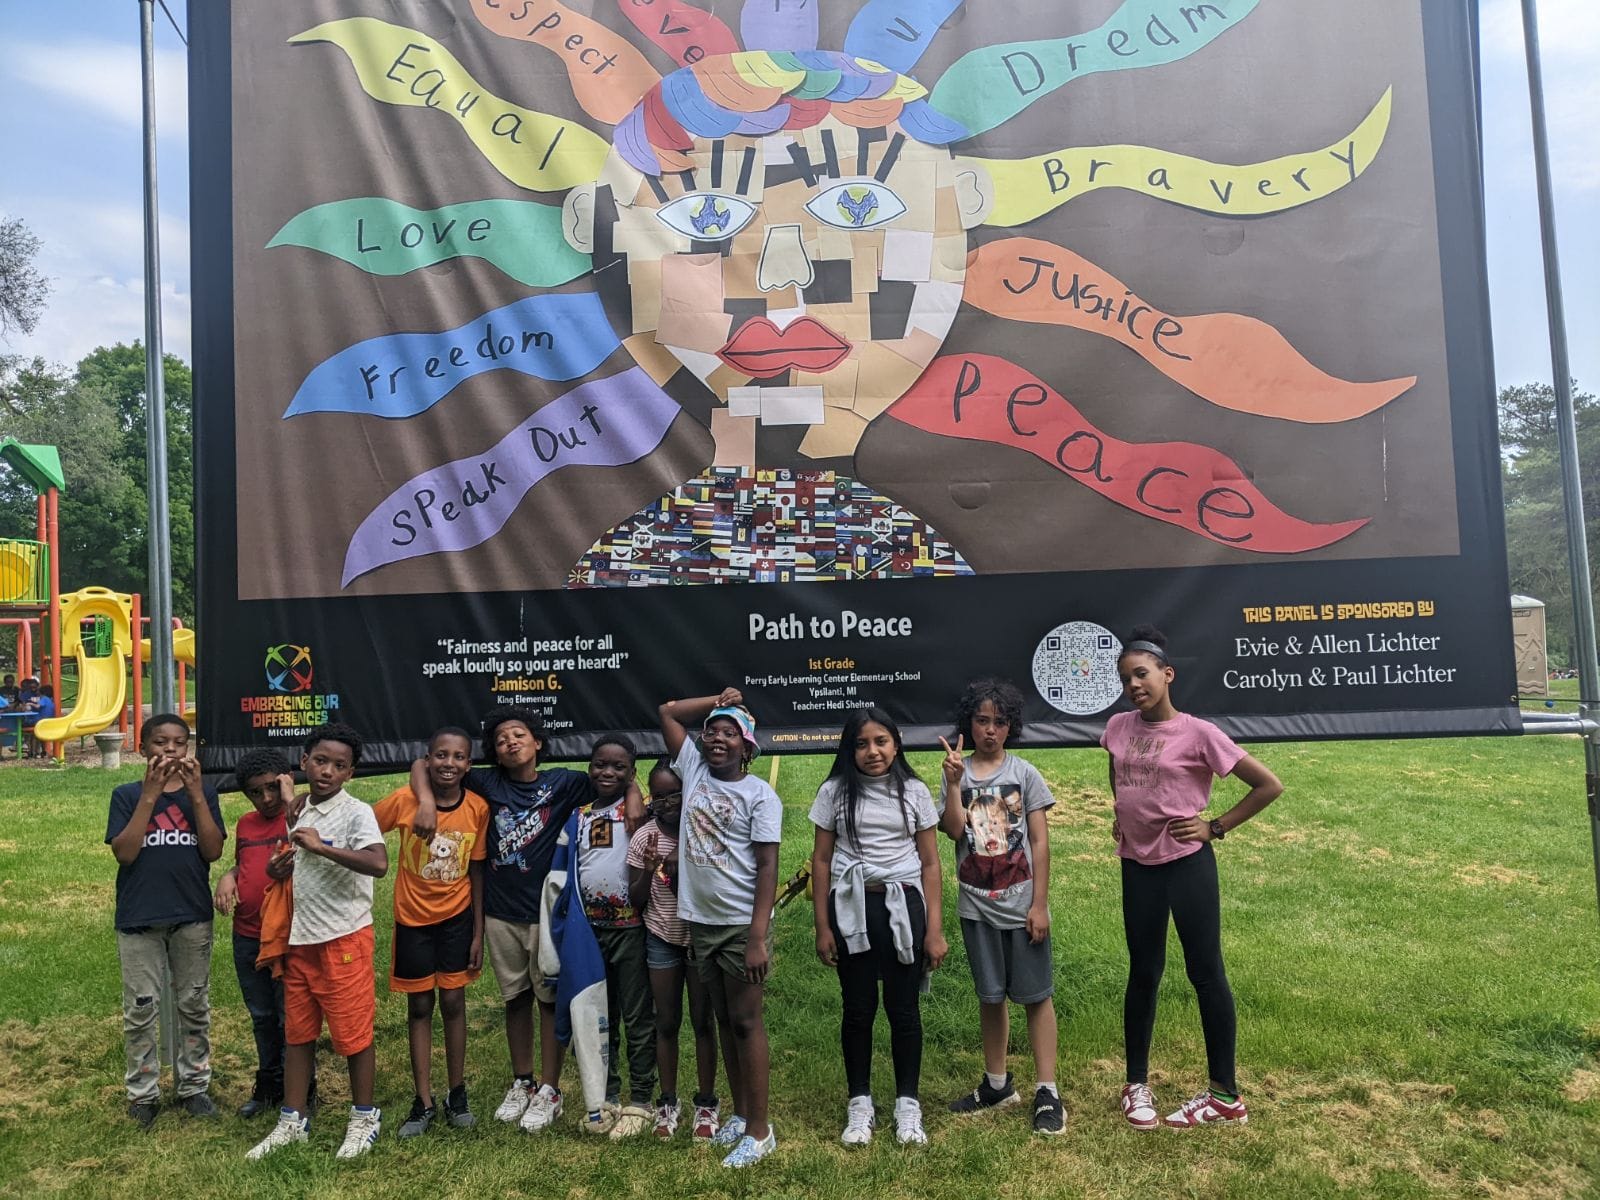 A group of children from diverse ethnic groups stand in front of a large, colorful art piece about diversity and inclusion.